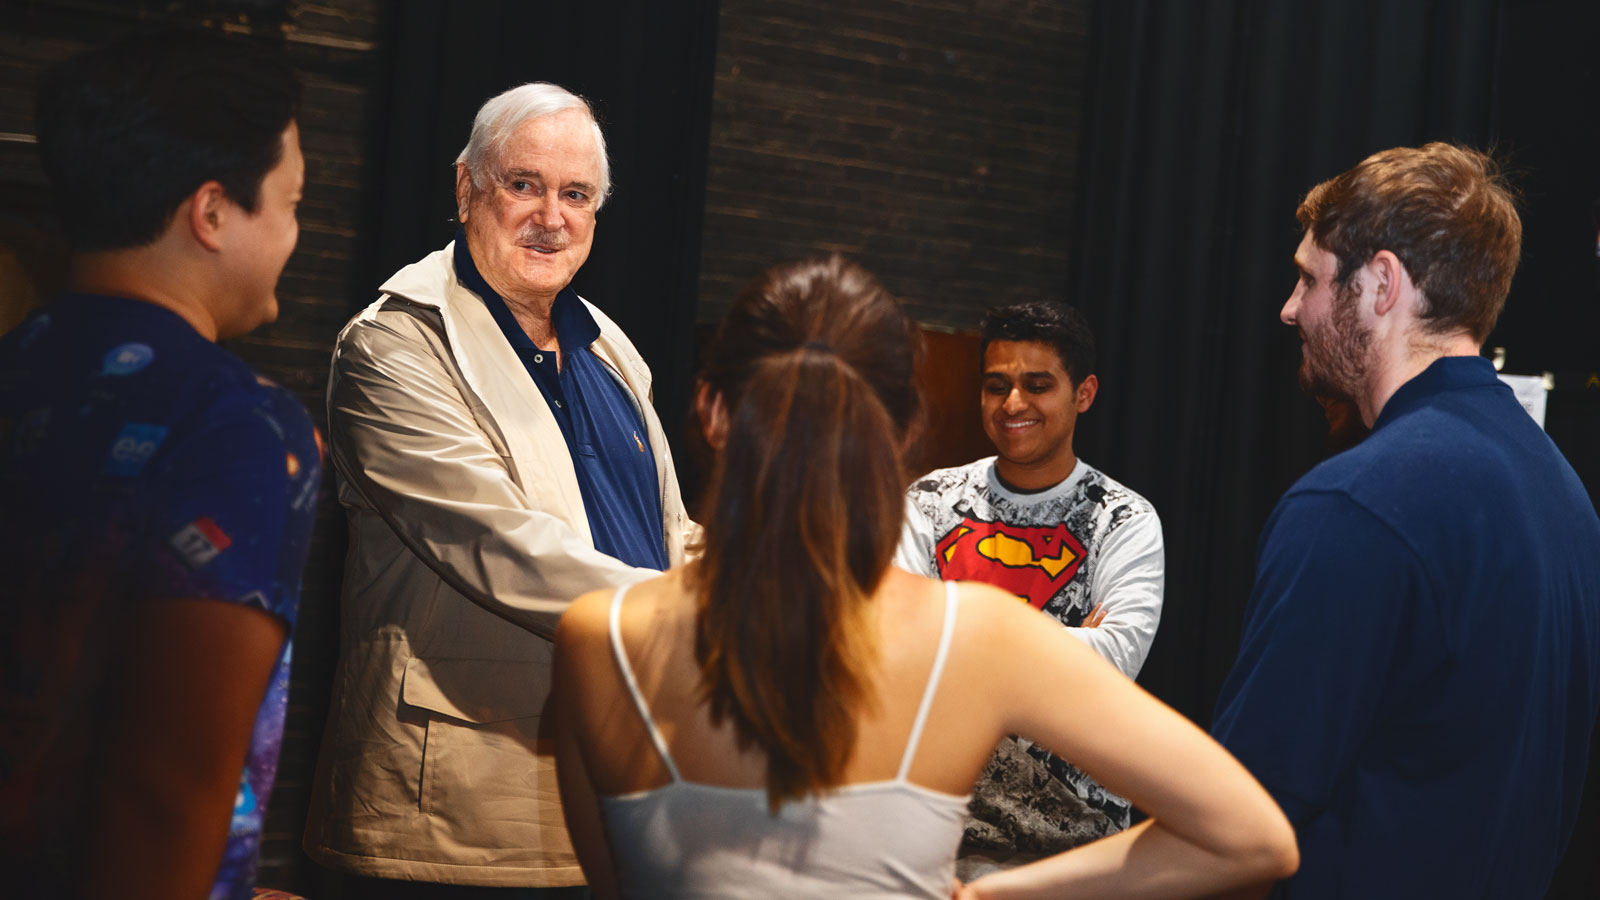 Actor John Cleese with Cornell University students at Cornell Cinema